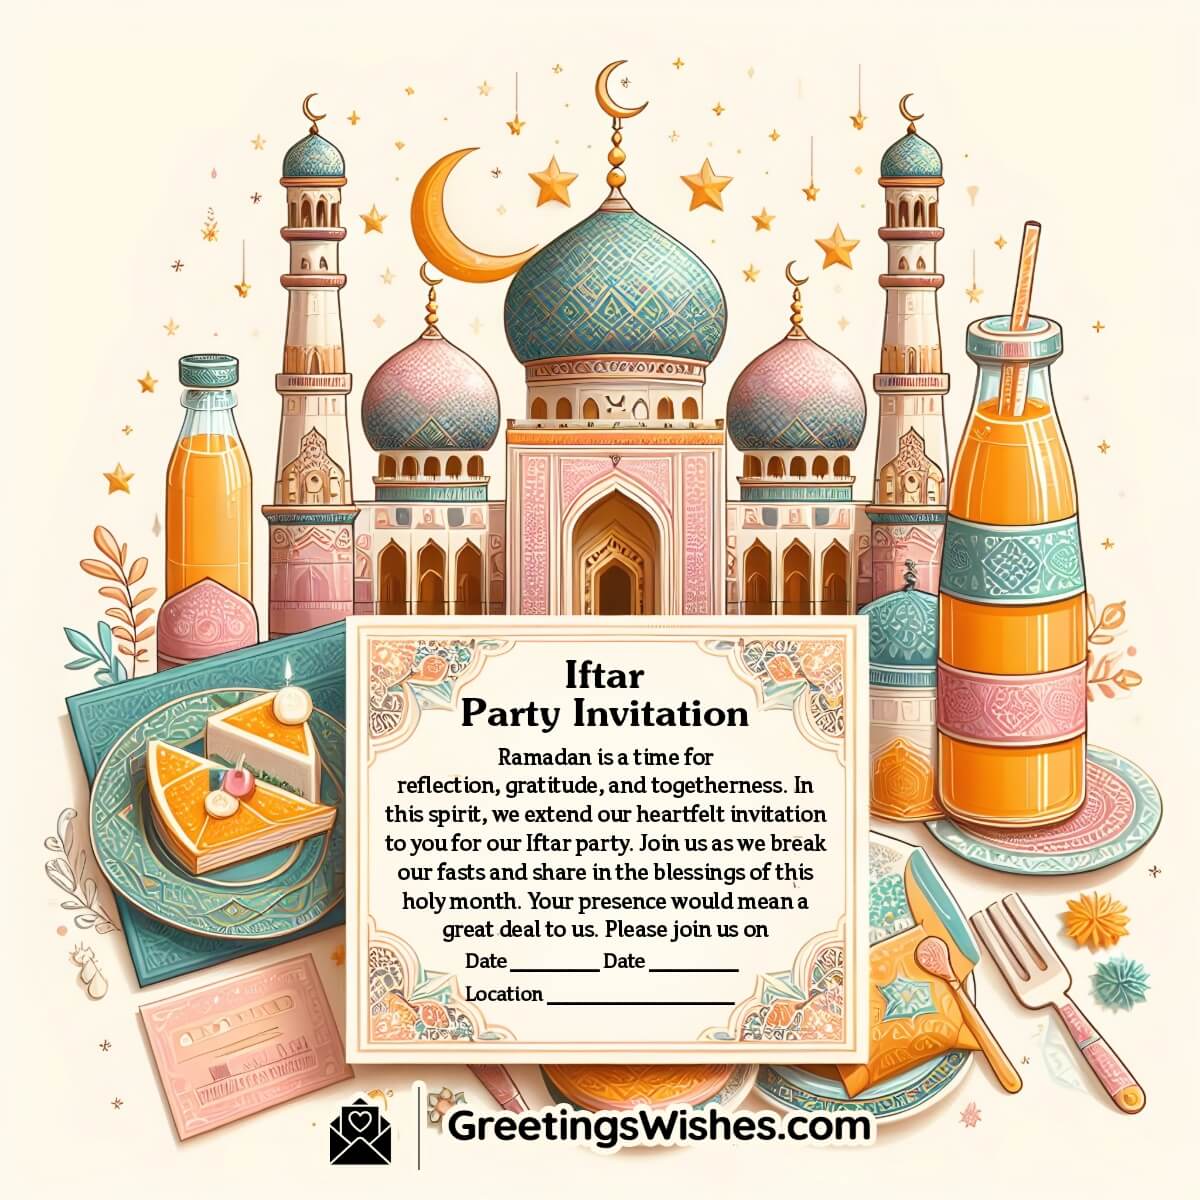 Iftar Party Invitation Letter Card